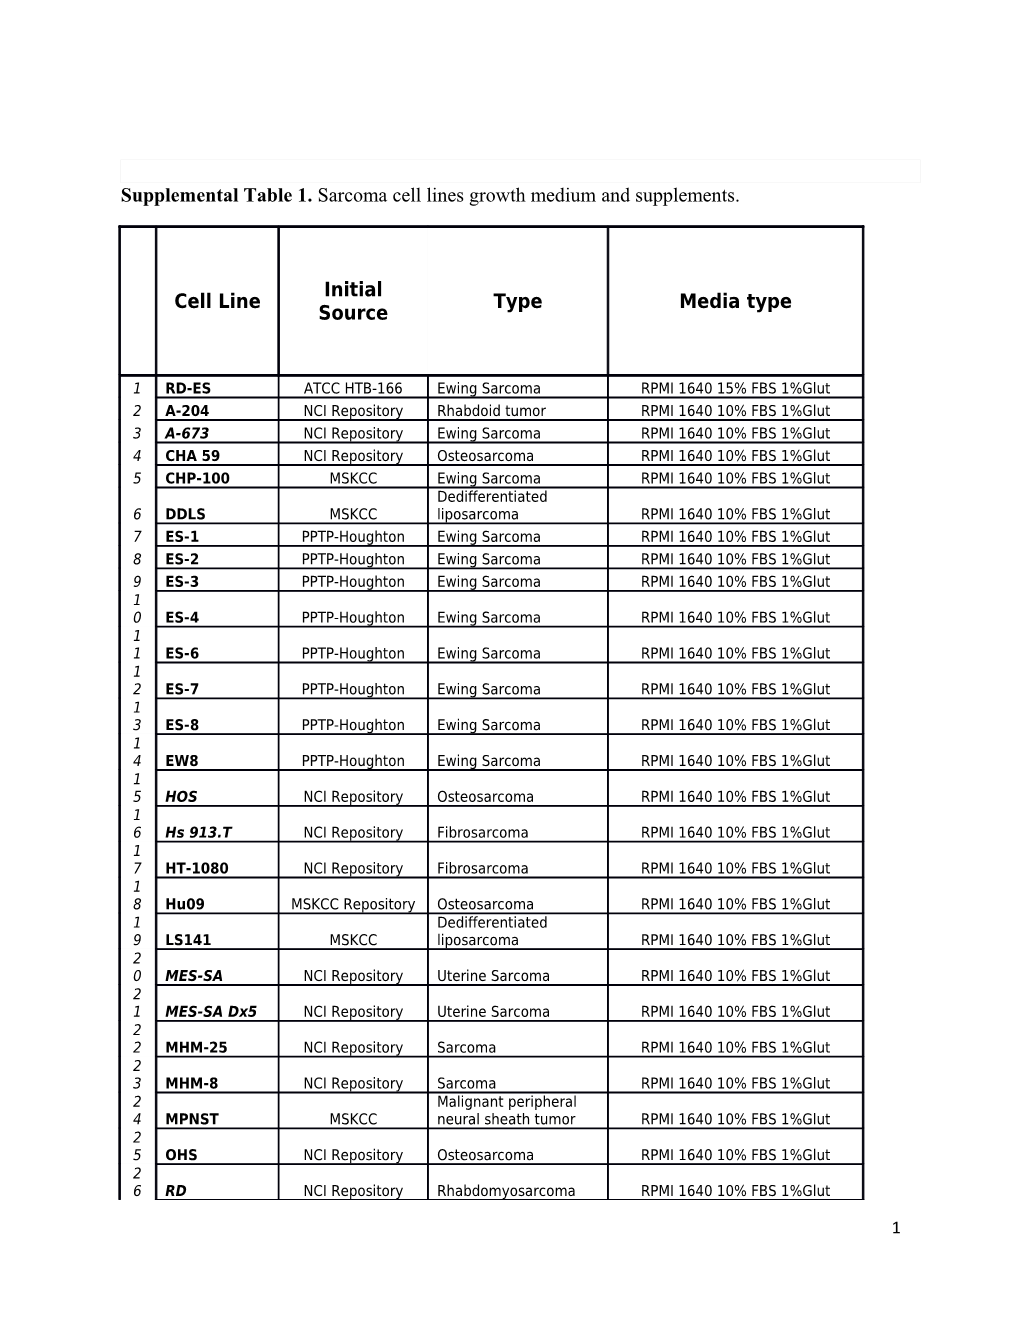 Supplemental Table 1. Sarcoma Cell Lines Growth Medium and Supplements